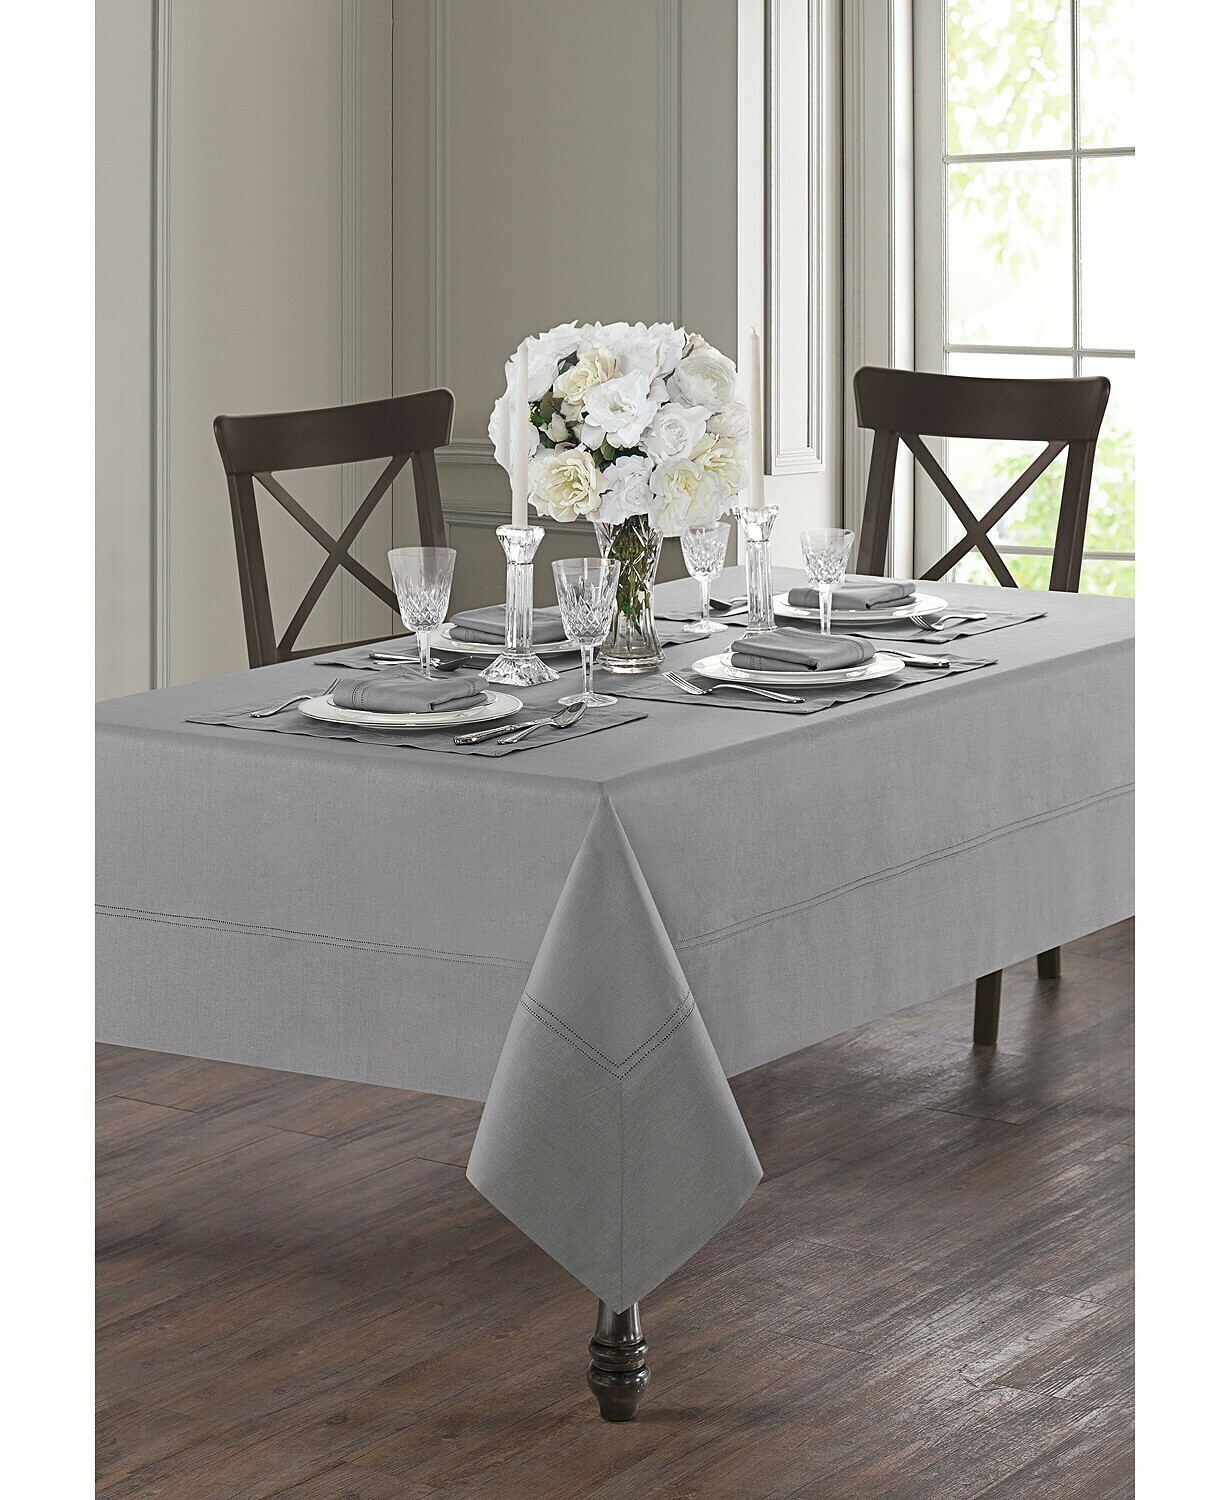 Waterford Linens  Addison 70 x 144 Tablecloth